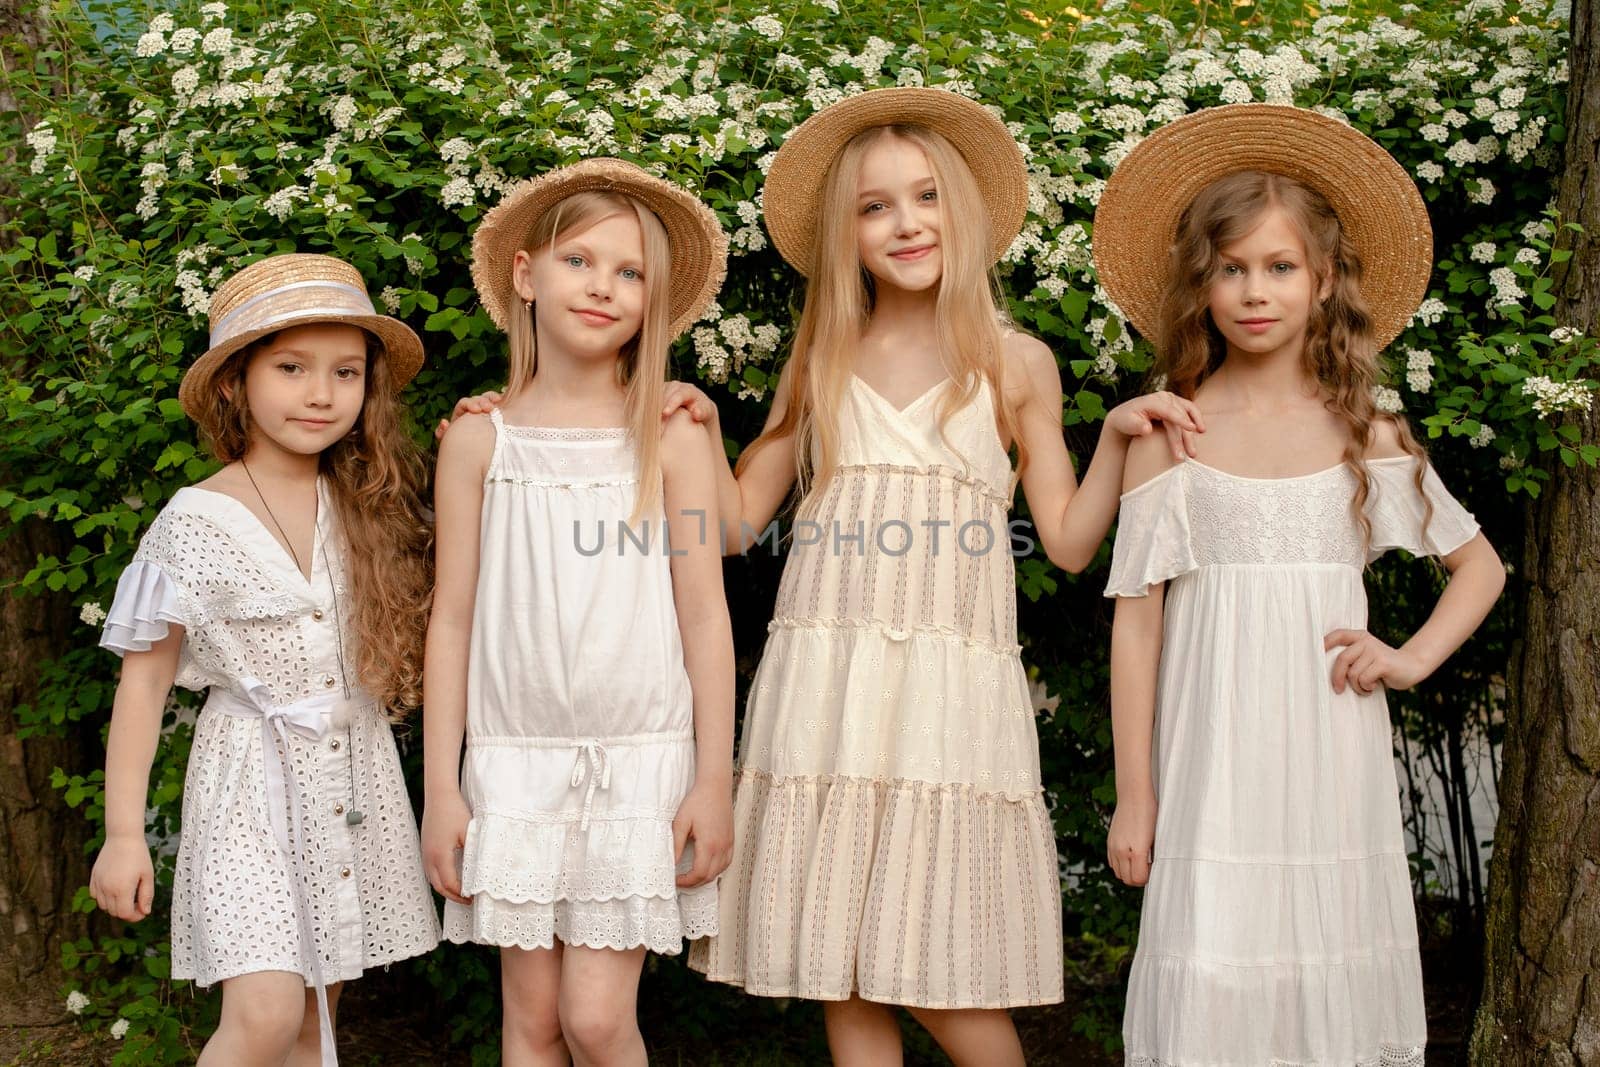 Group portrait of friendly happy preteen girls in country style dresses and wicker staw hats standing outdoors on background of large green shrub with white flowers on summer day